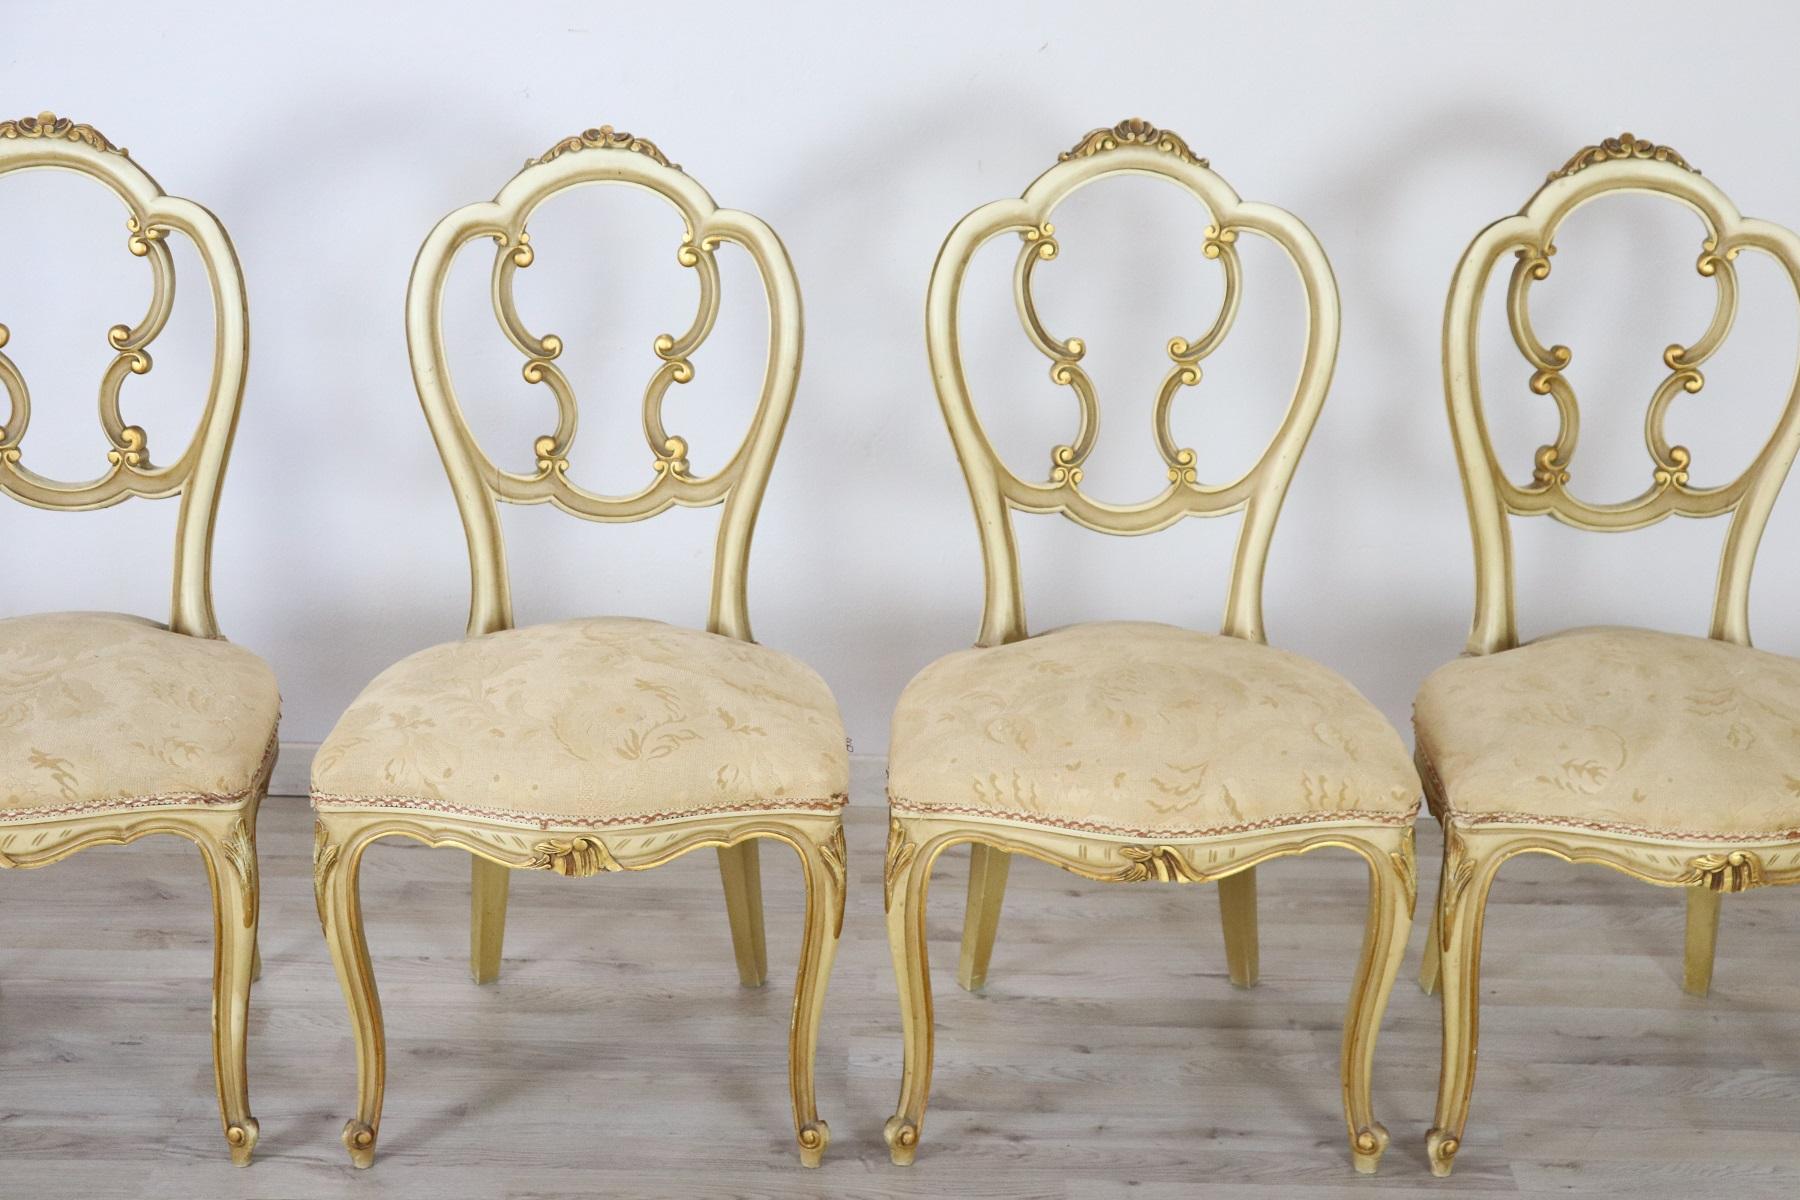 Italian Baroque style set of six chairs. Rich chairs in carved and gilded wood. Great woodwork with lots of curls and swirls of typical Italian Baroque taste. on request we have dining room table available on sale. Chairs ideal into a living room.